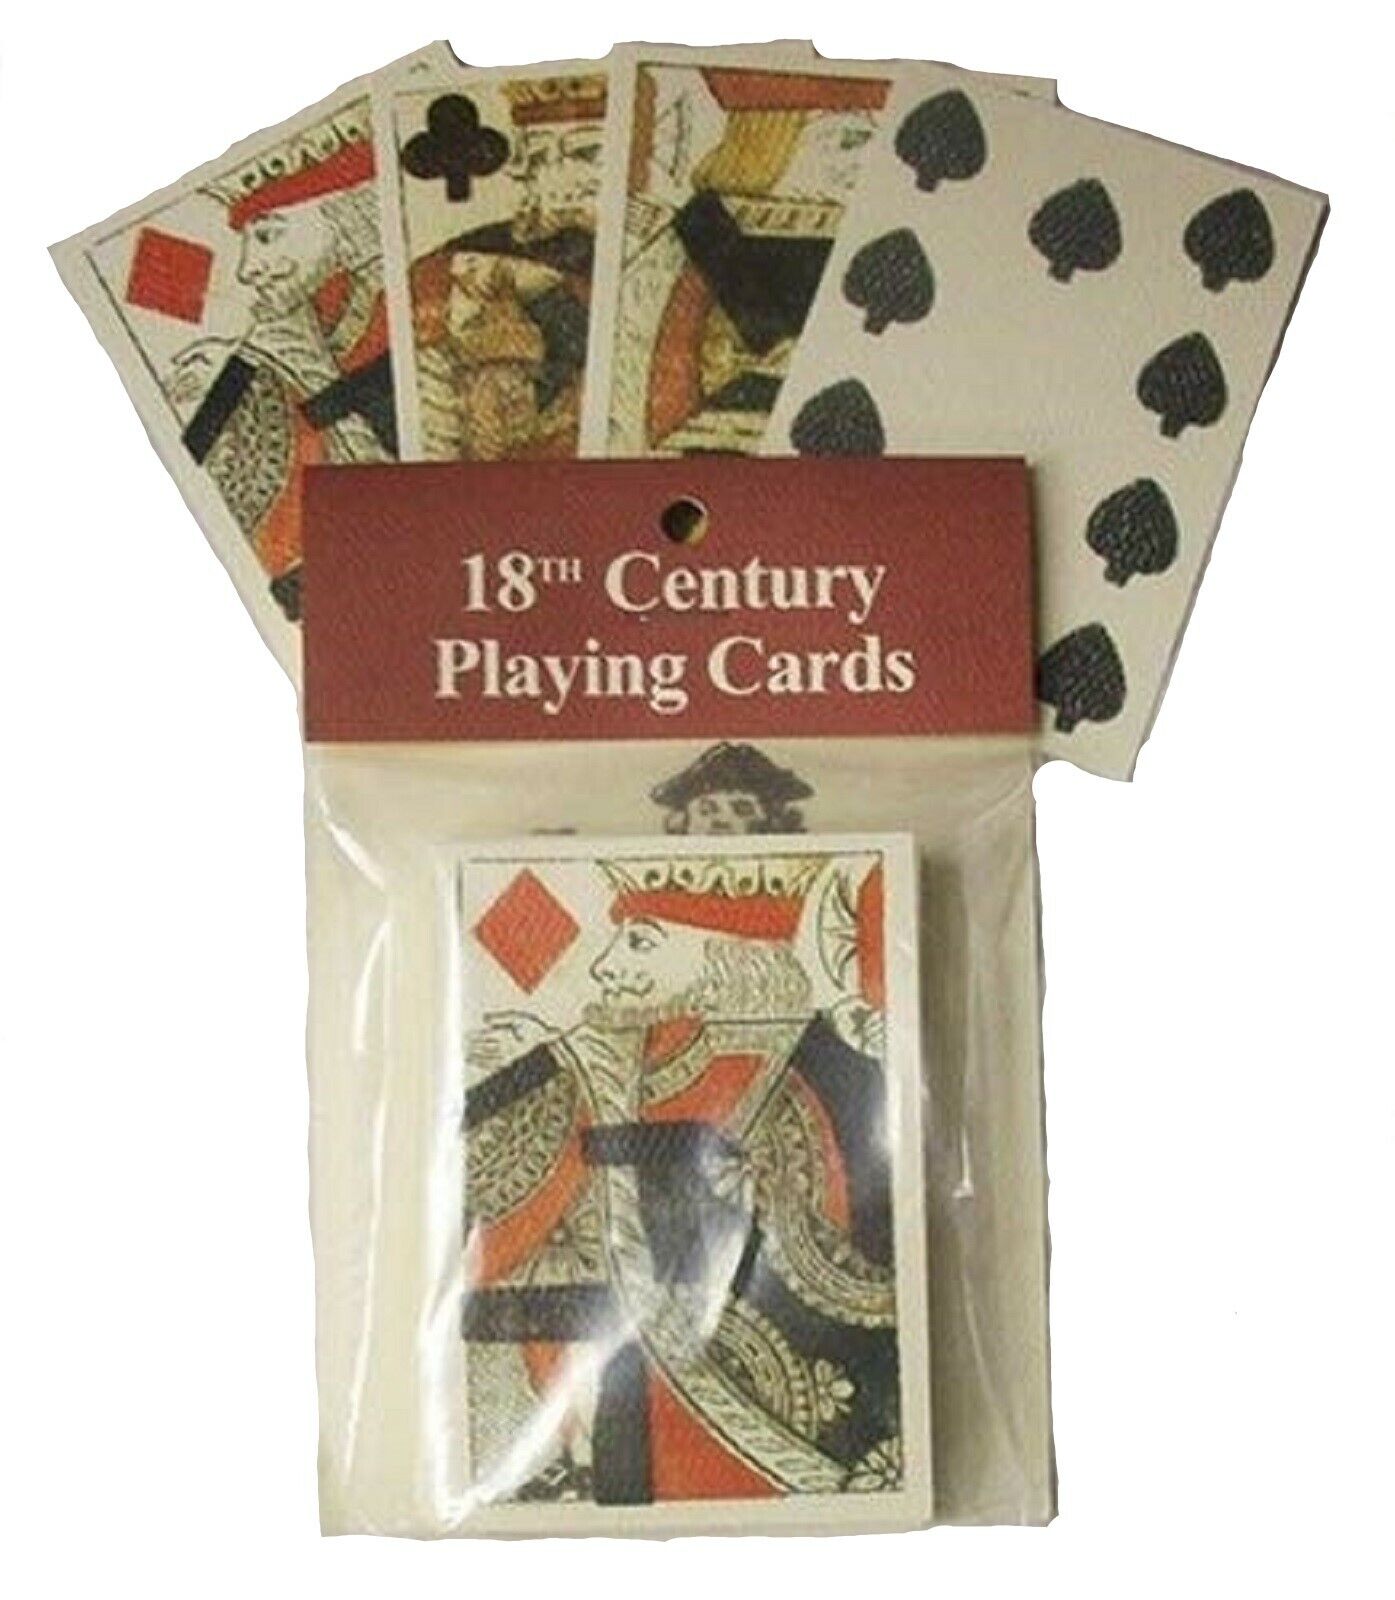 18TH CENTURY PLAYING CARD DECK